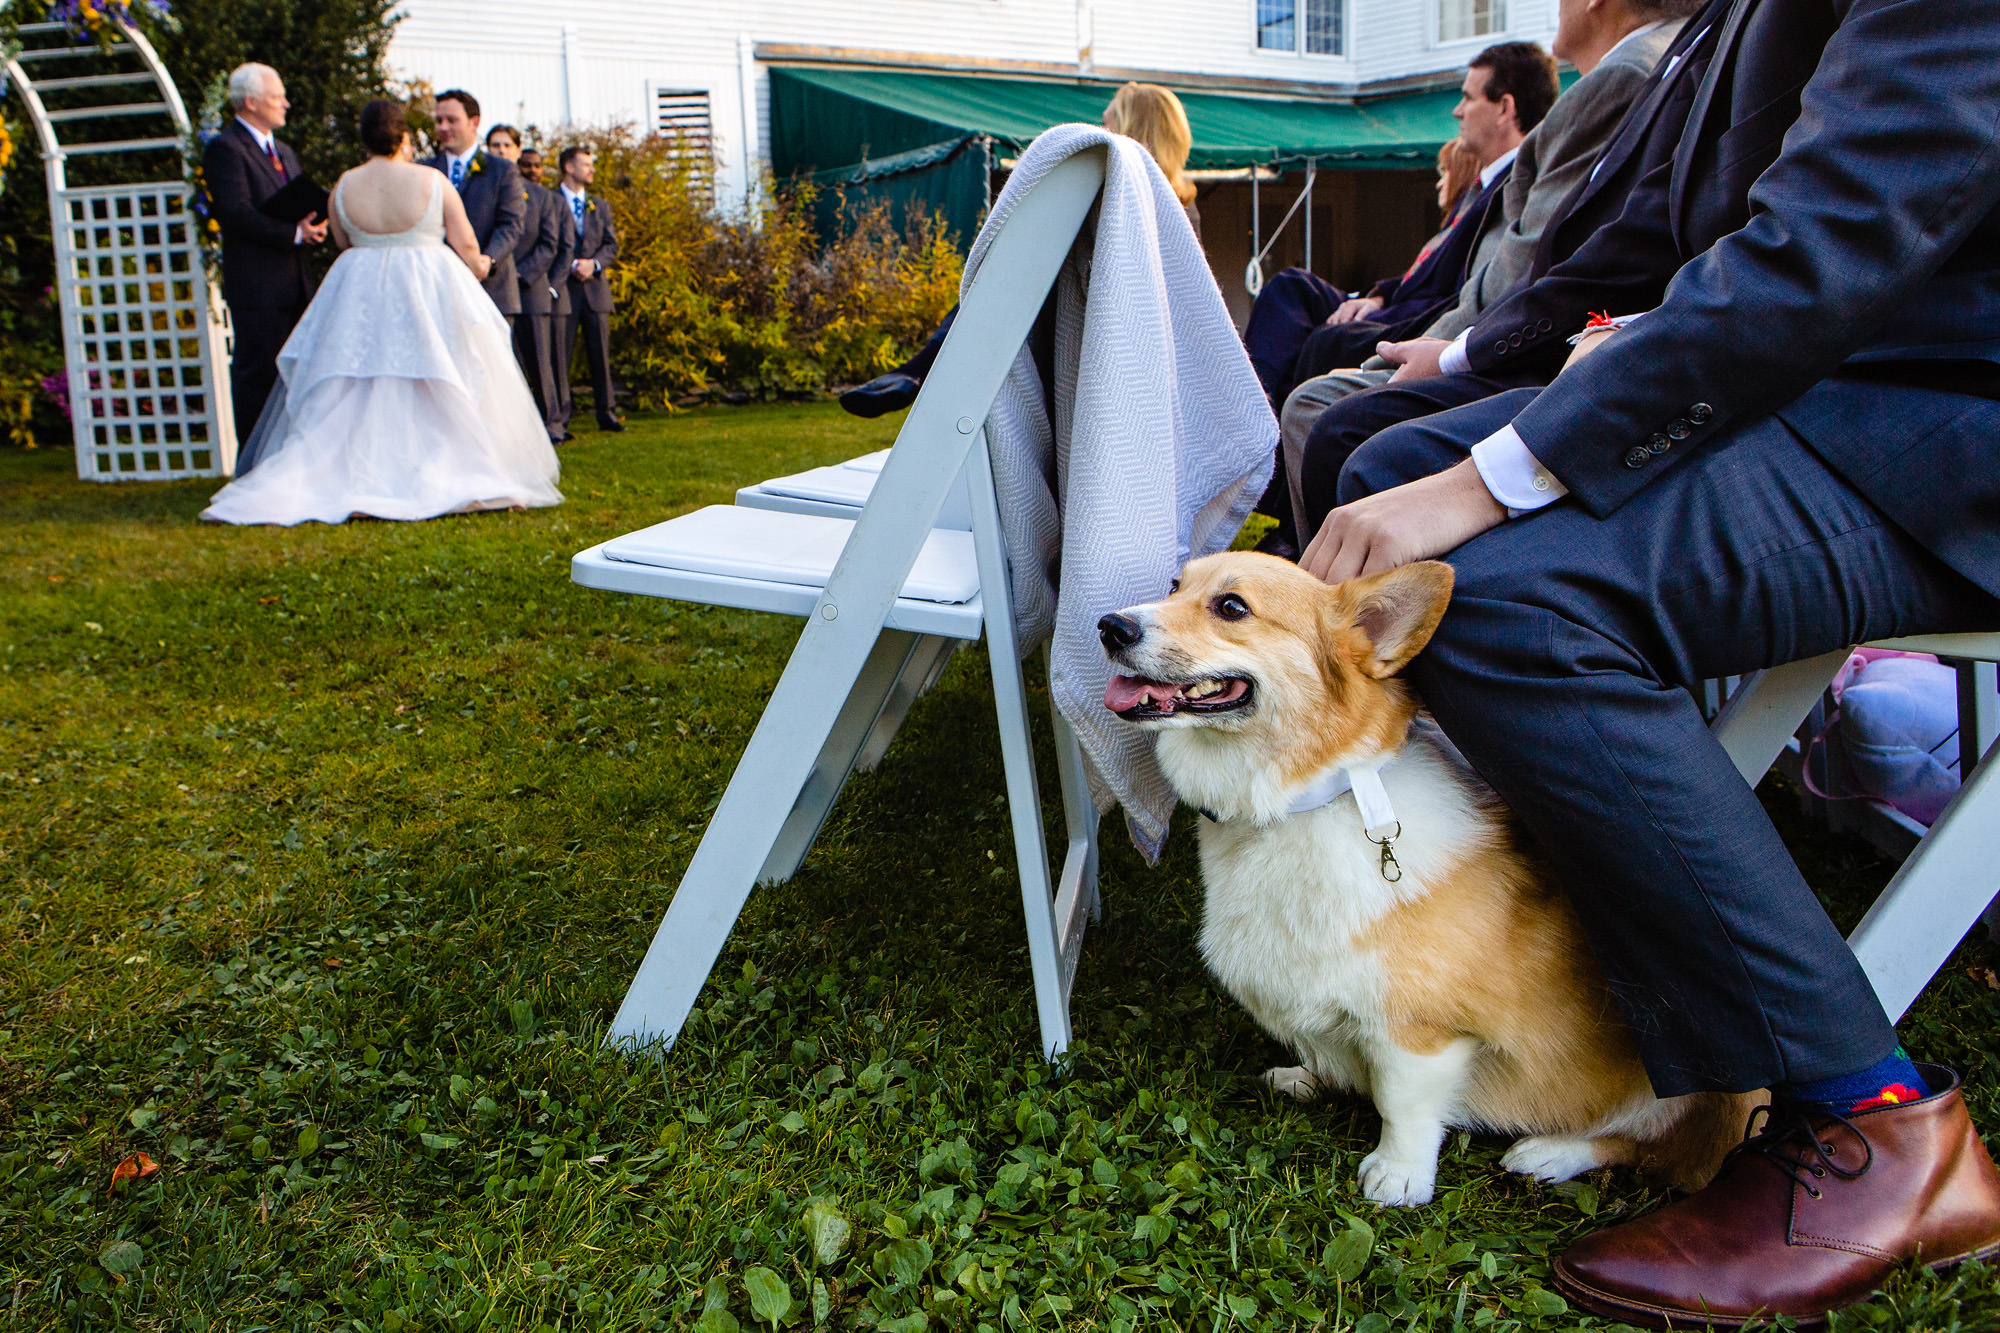 The couple's dog watches on at their Freeport Maine wedding